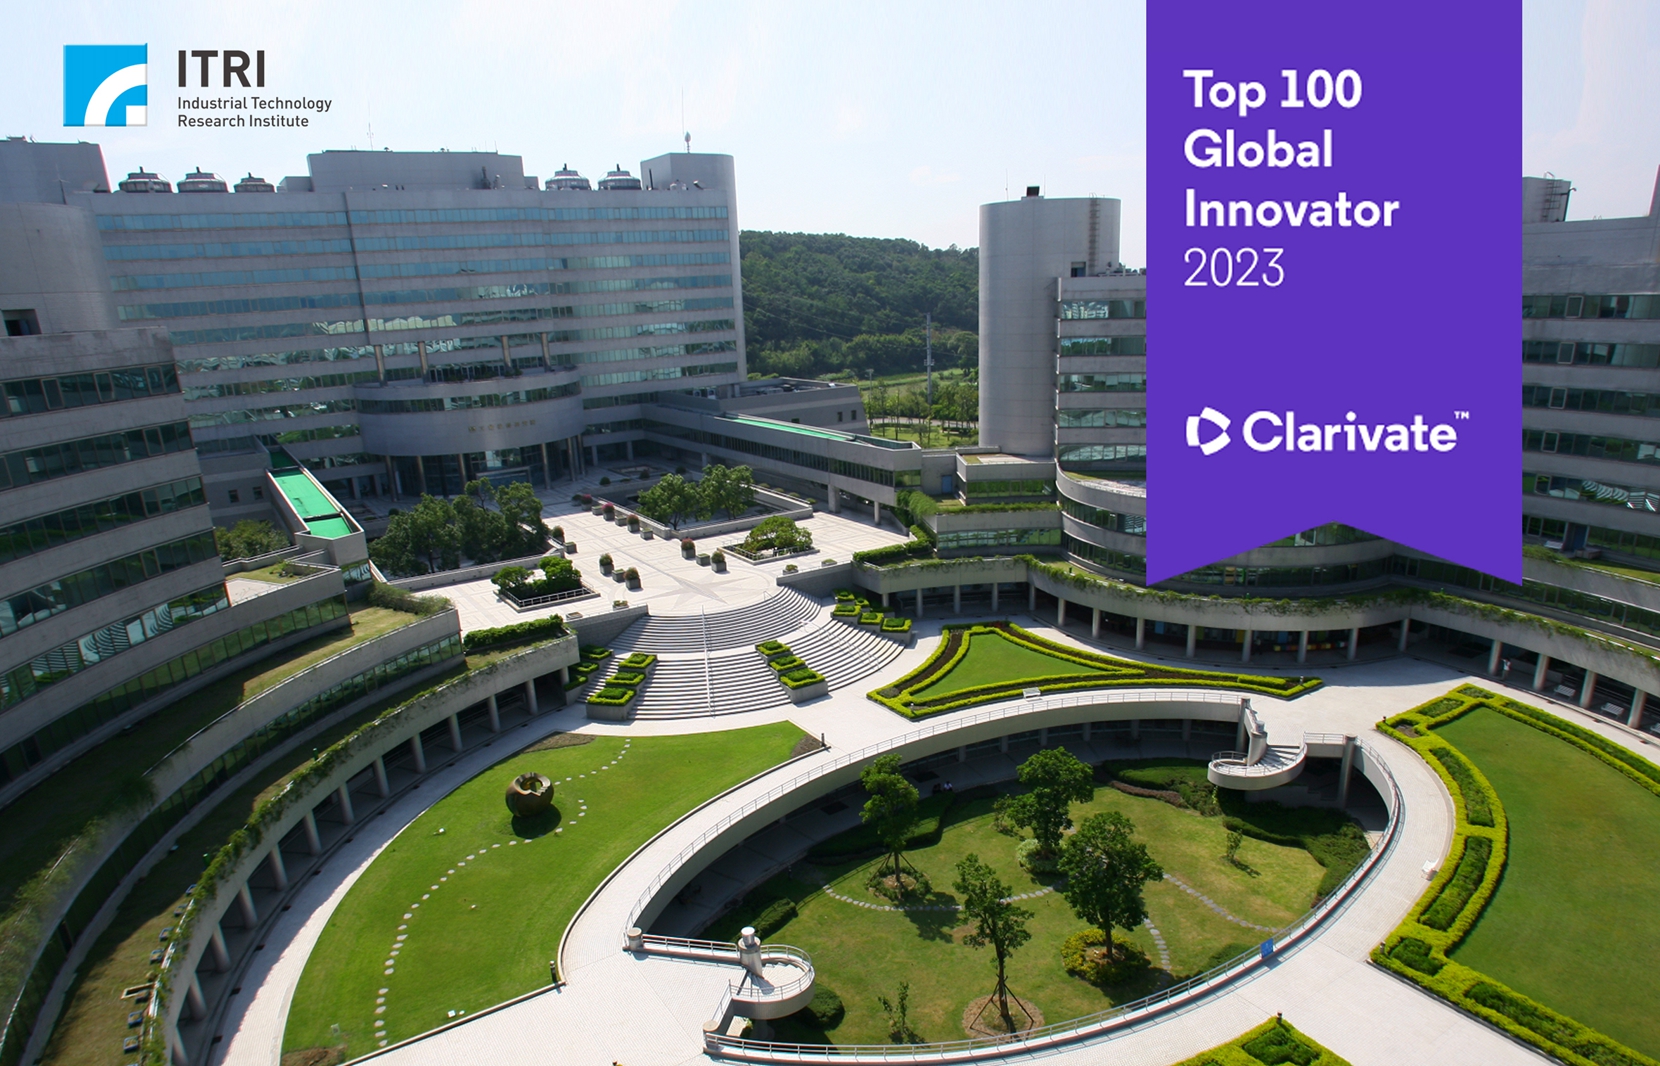 ITRI has been named a Top 100 Global Innovator for the seventh time and sixth consecutive year.